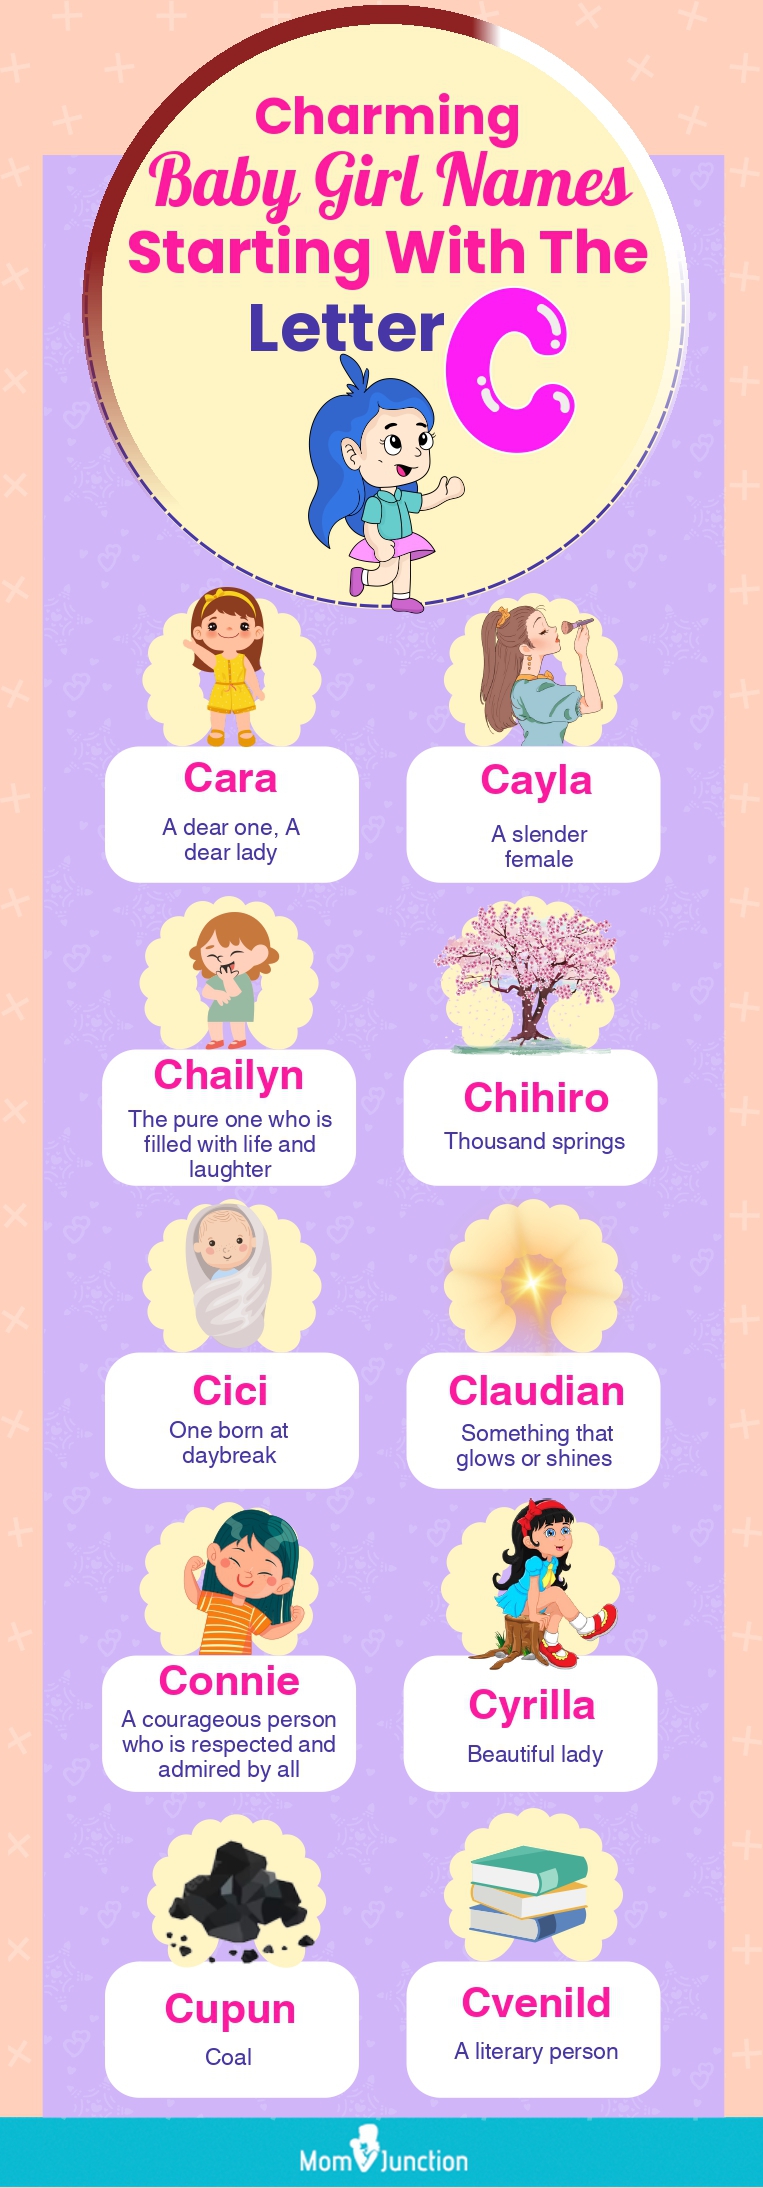 charming baby girl names starting with the letter c (infographic)